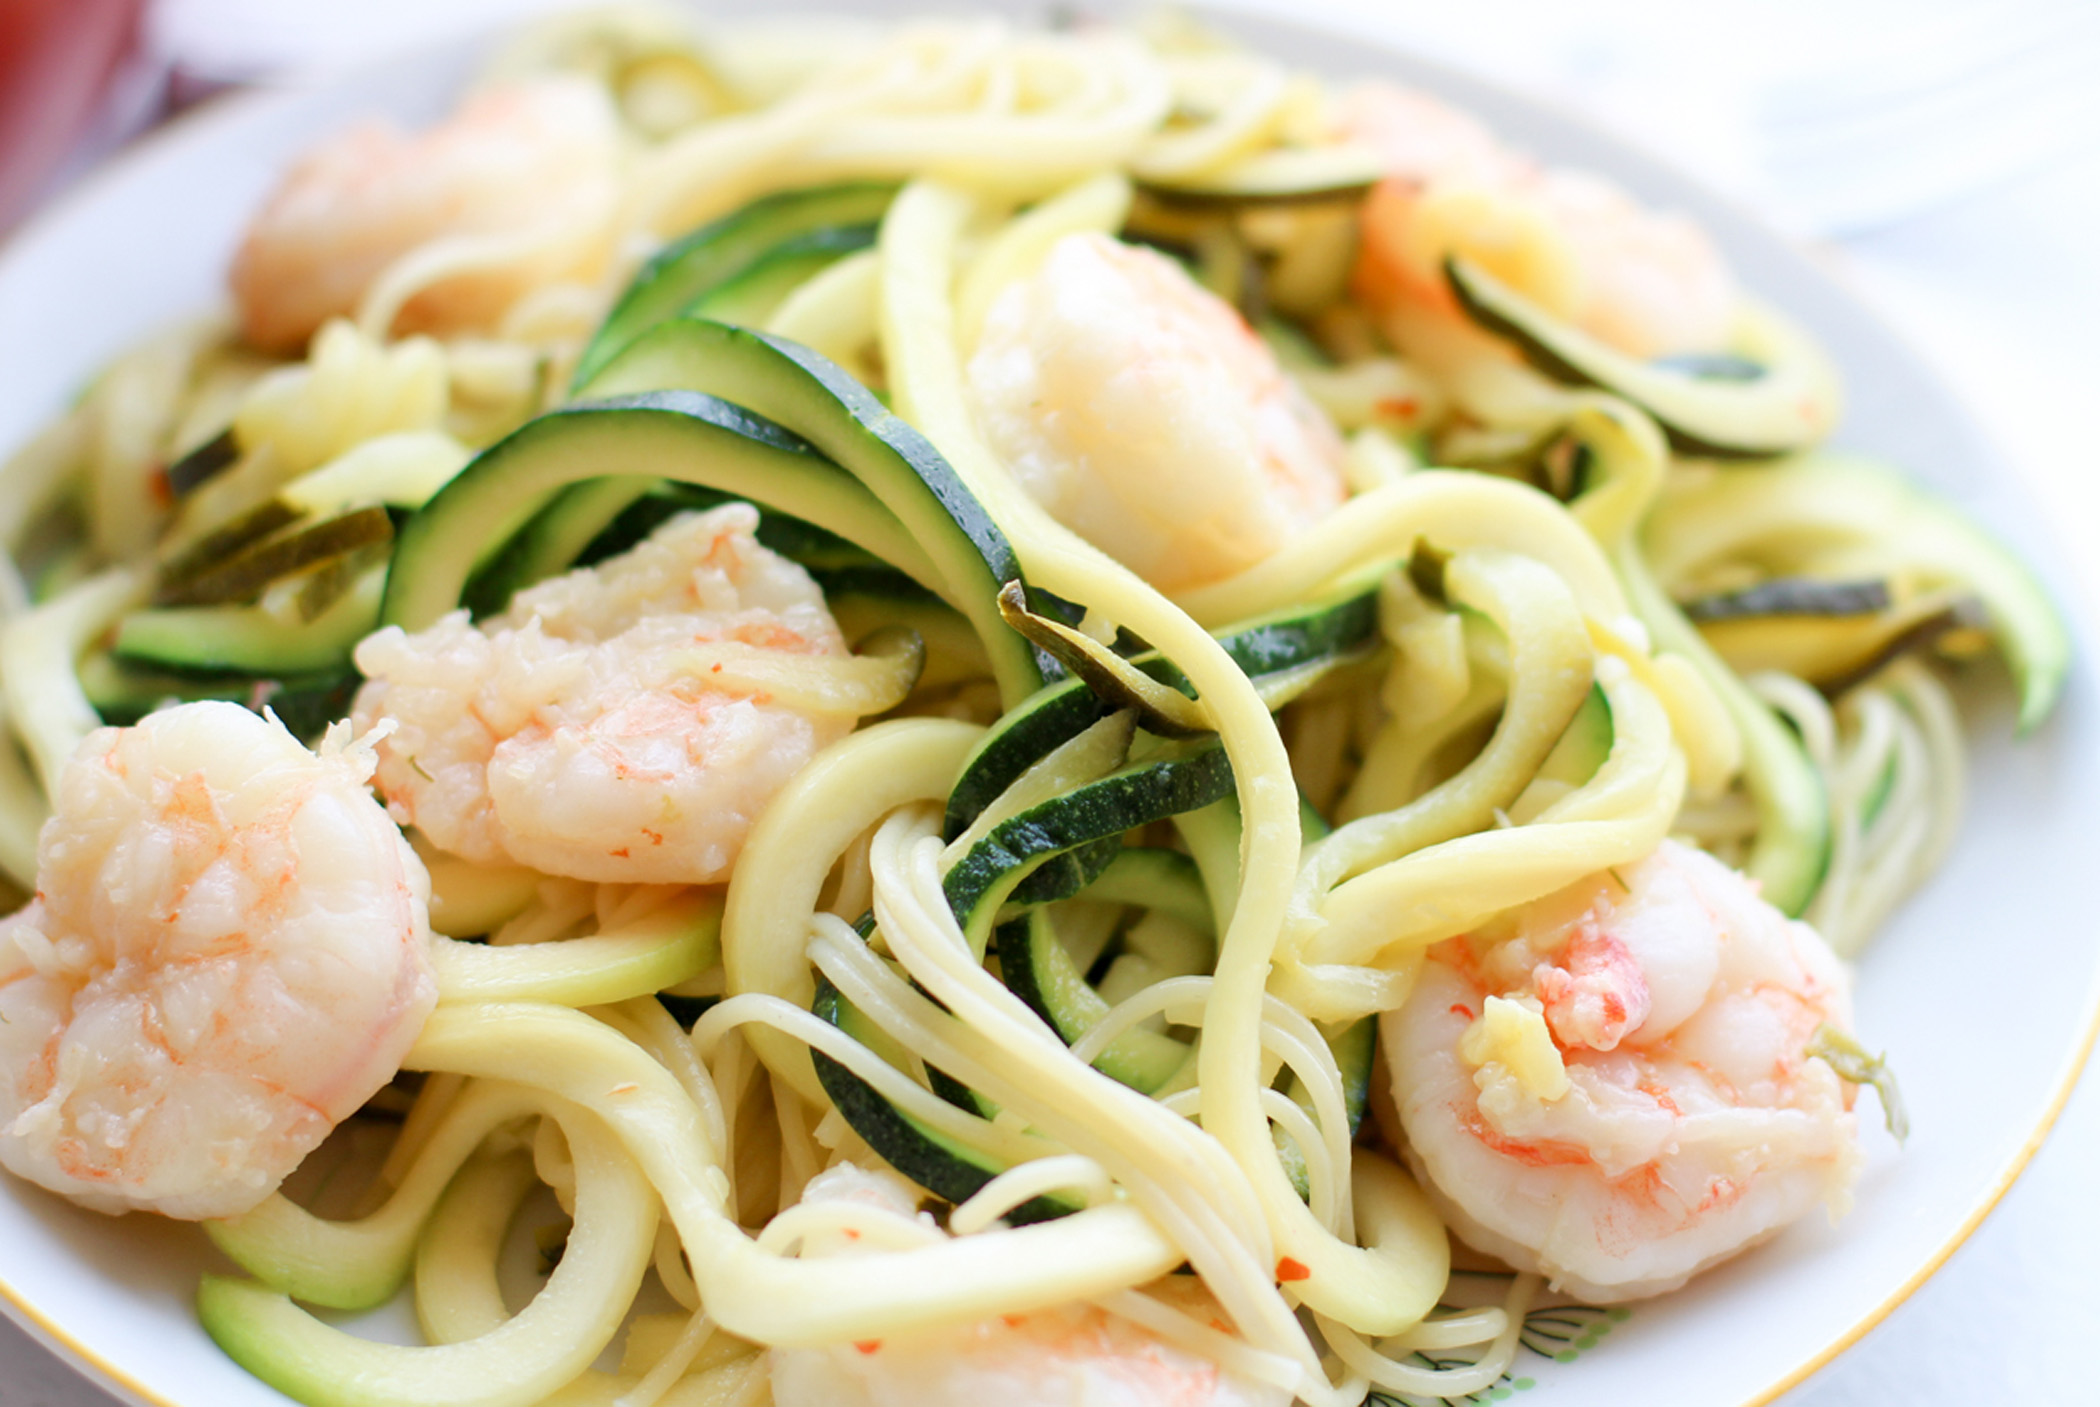 Extreme close-up of shrimp scampi made using spaghetti-type noodles made from zucchini